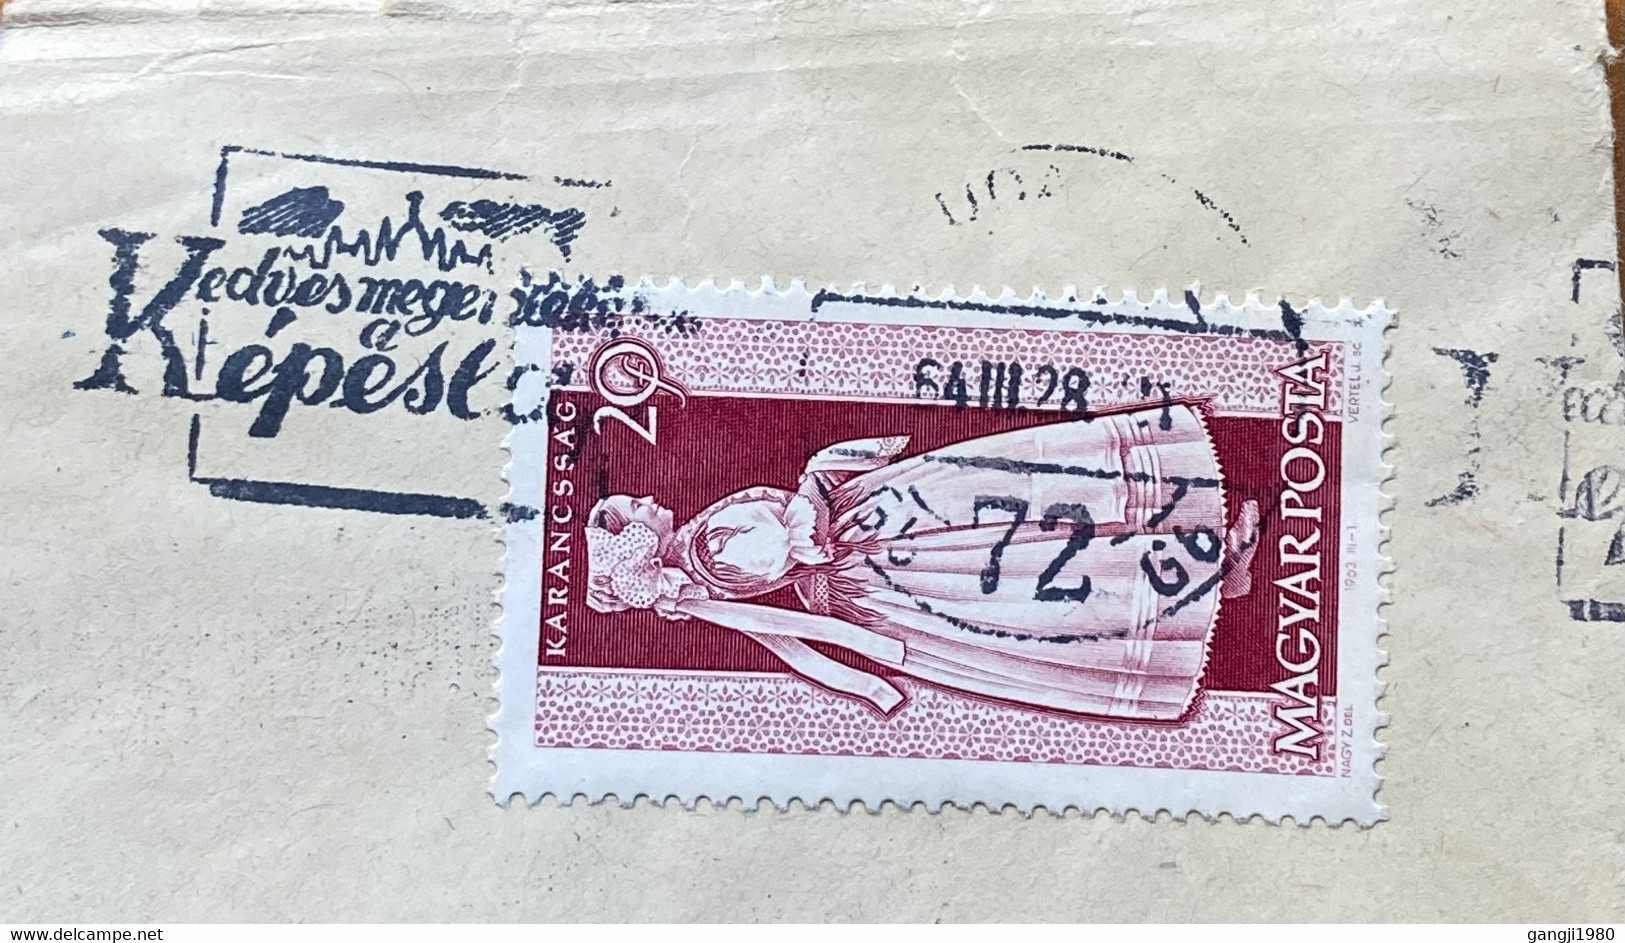 HUNGARY 1964, COVER USED TO USA, FIRM PRINTED "KULTURA" MACHINE SLOGAN CANCEL, KADVES MEGEI KEPESLO, COSTUMES STAMP. - Covers & Documents